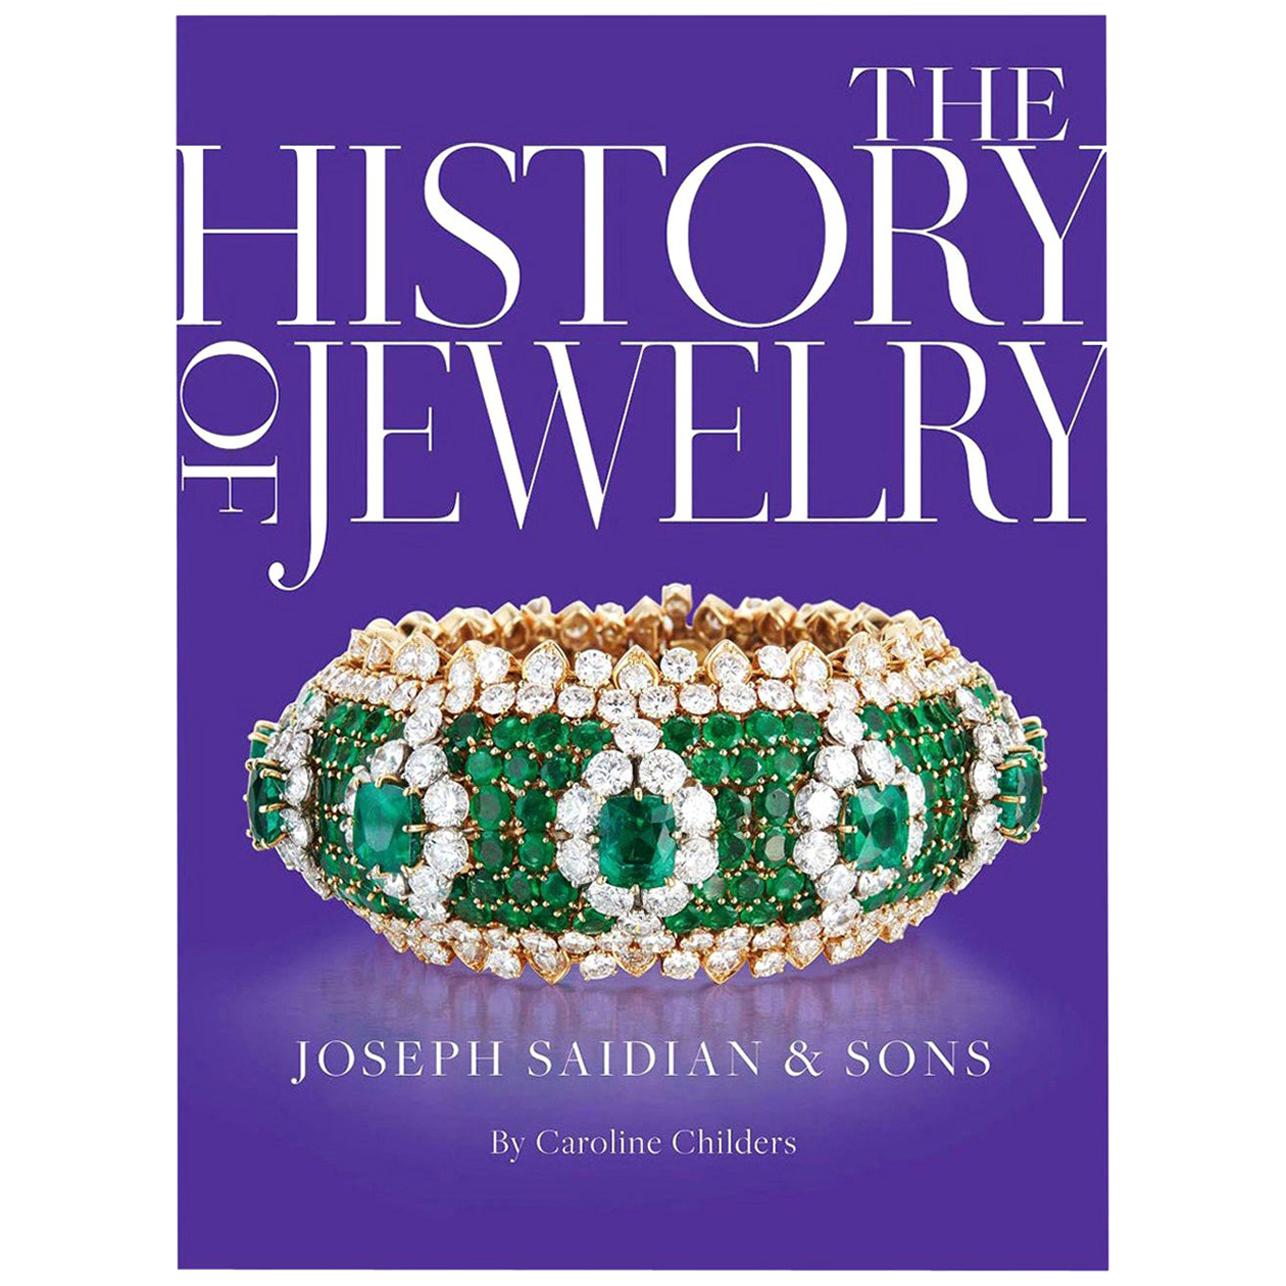 "The History of Jewelry" Published by Rizzoli For Sale